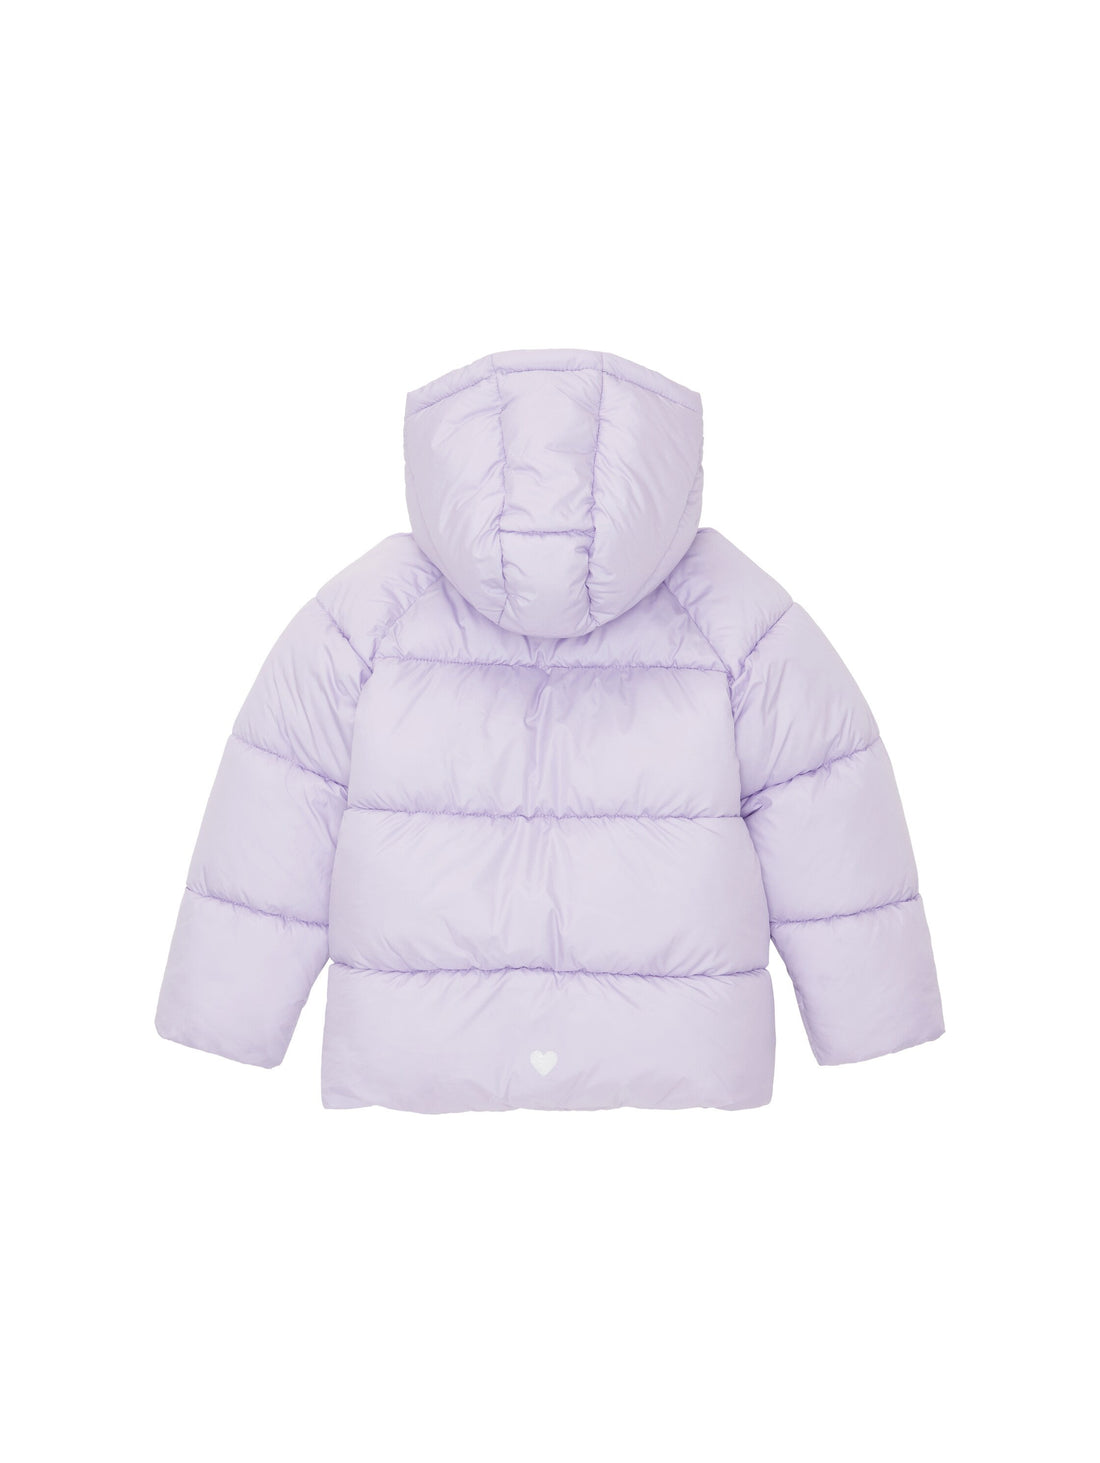 Puffer Jacket With Hood_1038501_29478_02